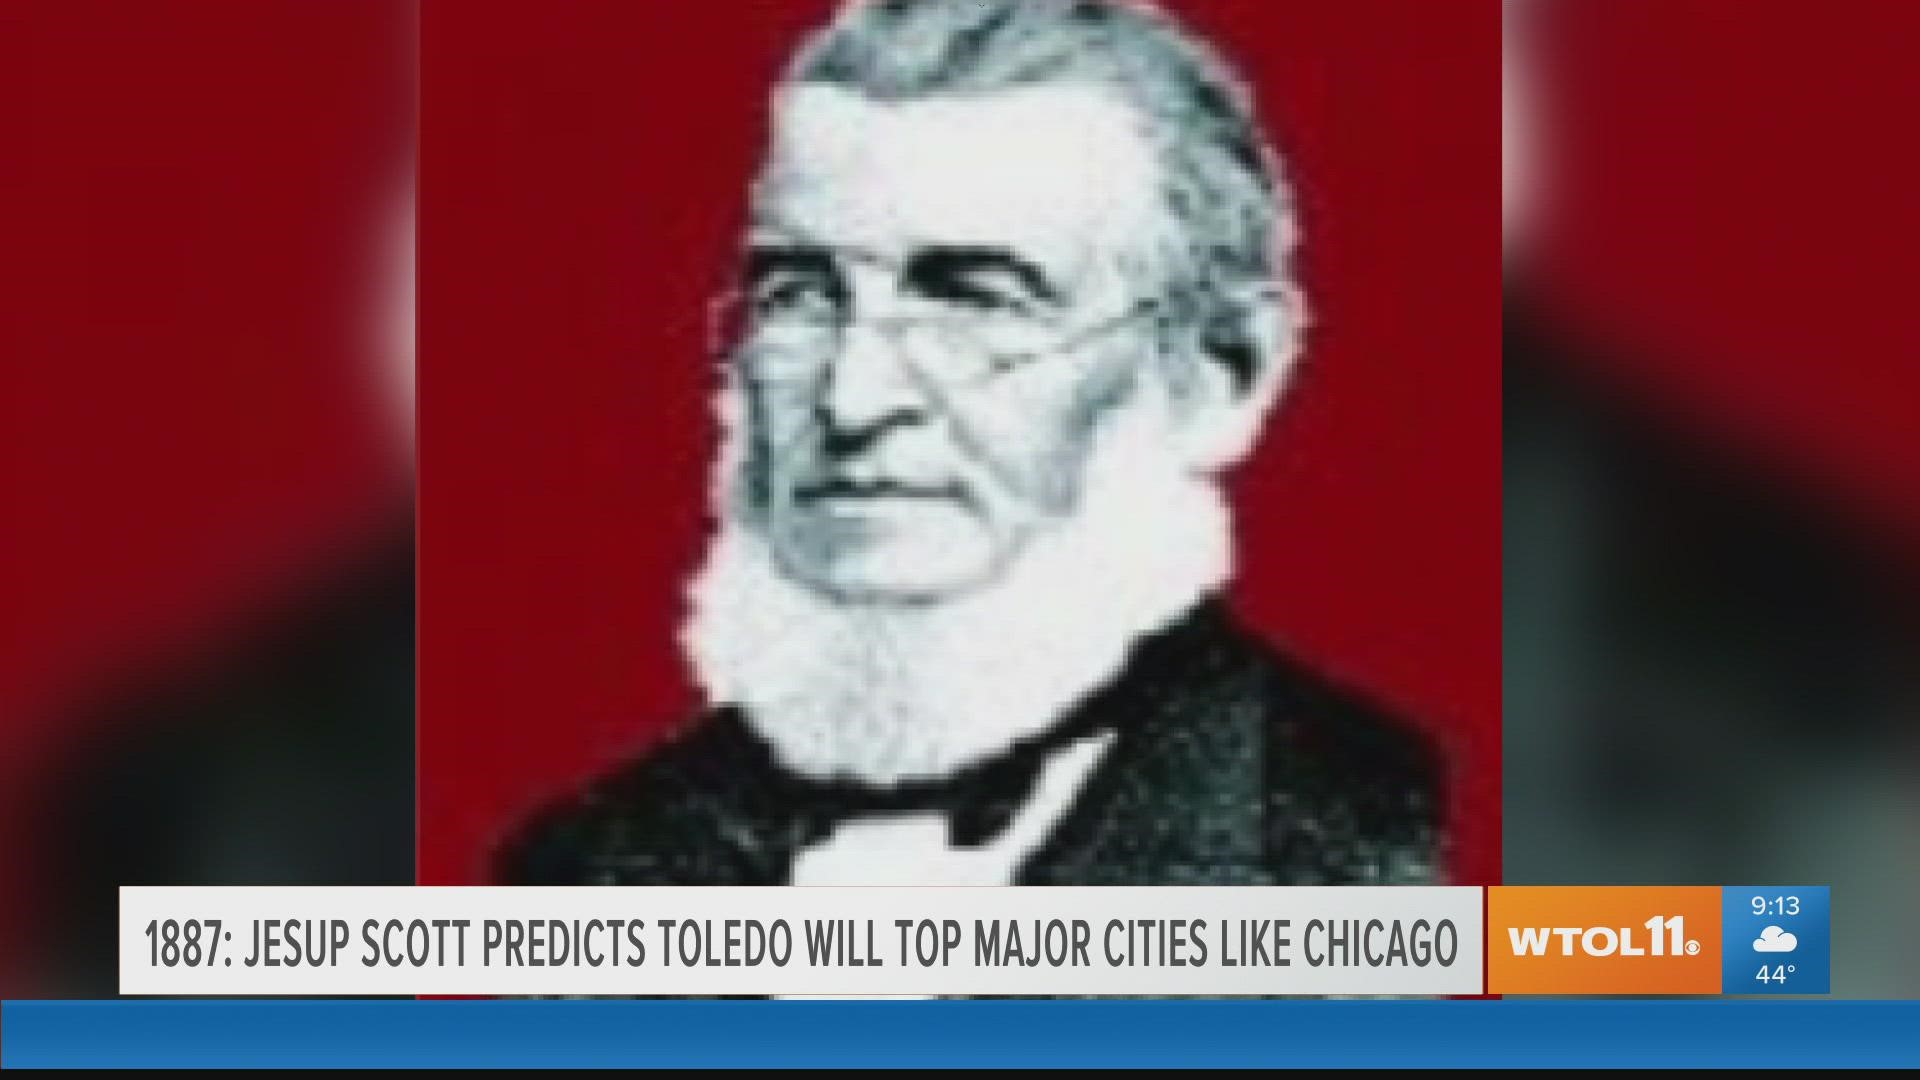 In 1887, businessman Jesup Scott predicts that Toledo "will become the great Metropolis of the West," surpassing Chicago and other major cities.